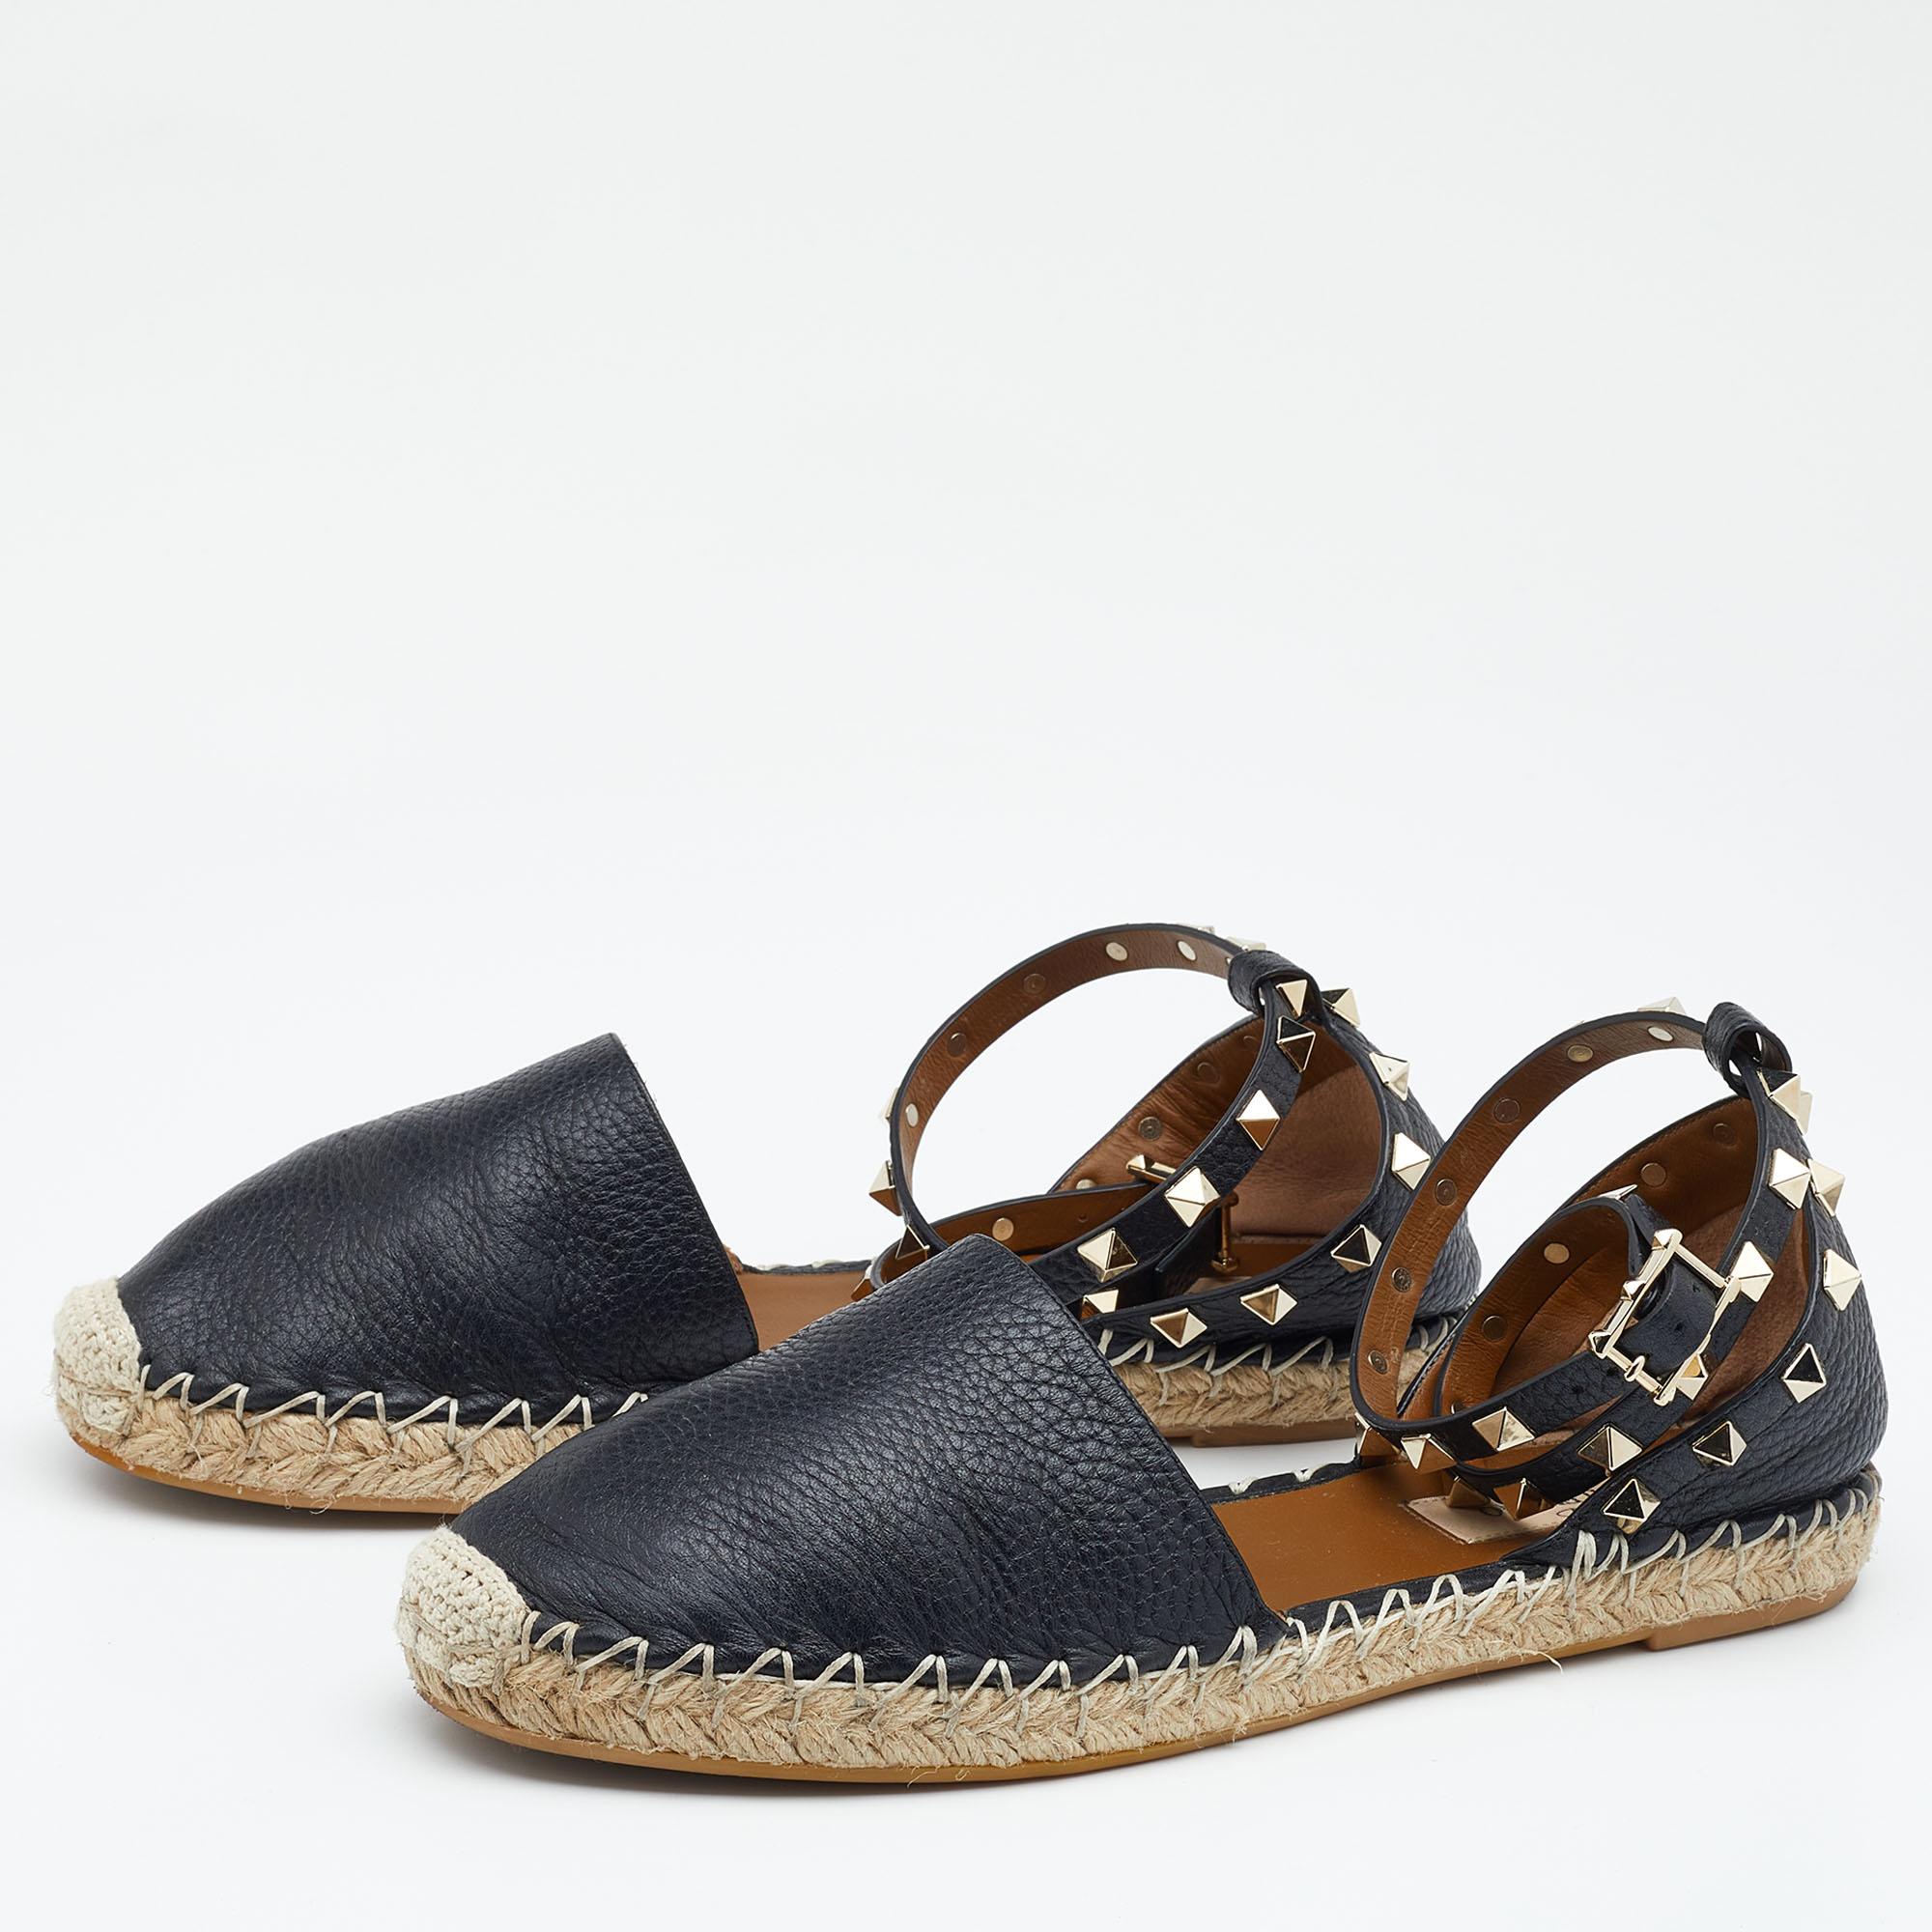 Step out in style with these espadrille flats from Valentino. Featuring a shade of black with closed toes, ankle straps with signature Rockstuds, and braided detailing on the midsoles, these flats are sure to stand out. They are finished with